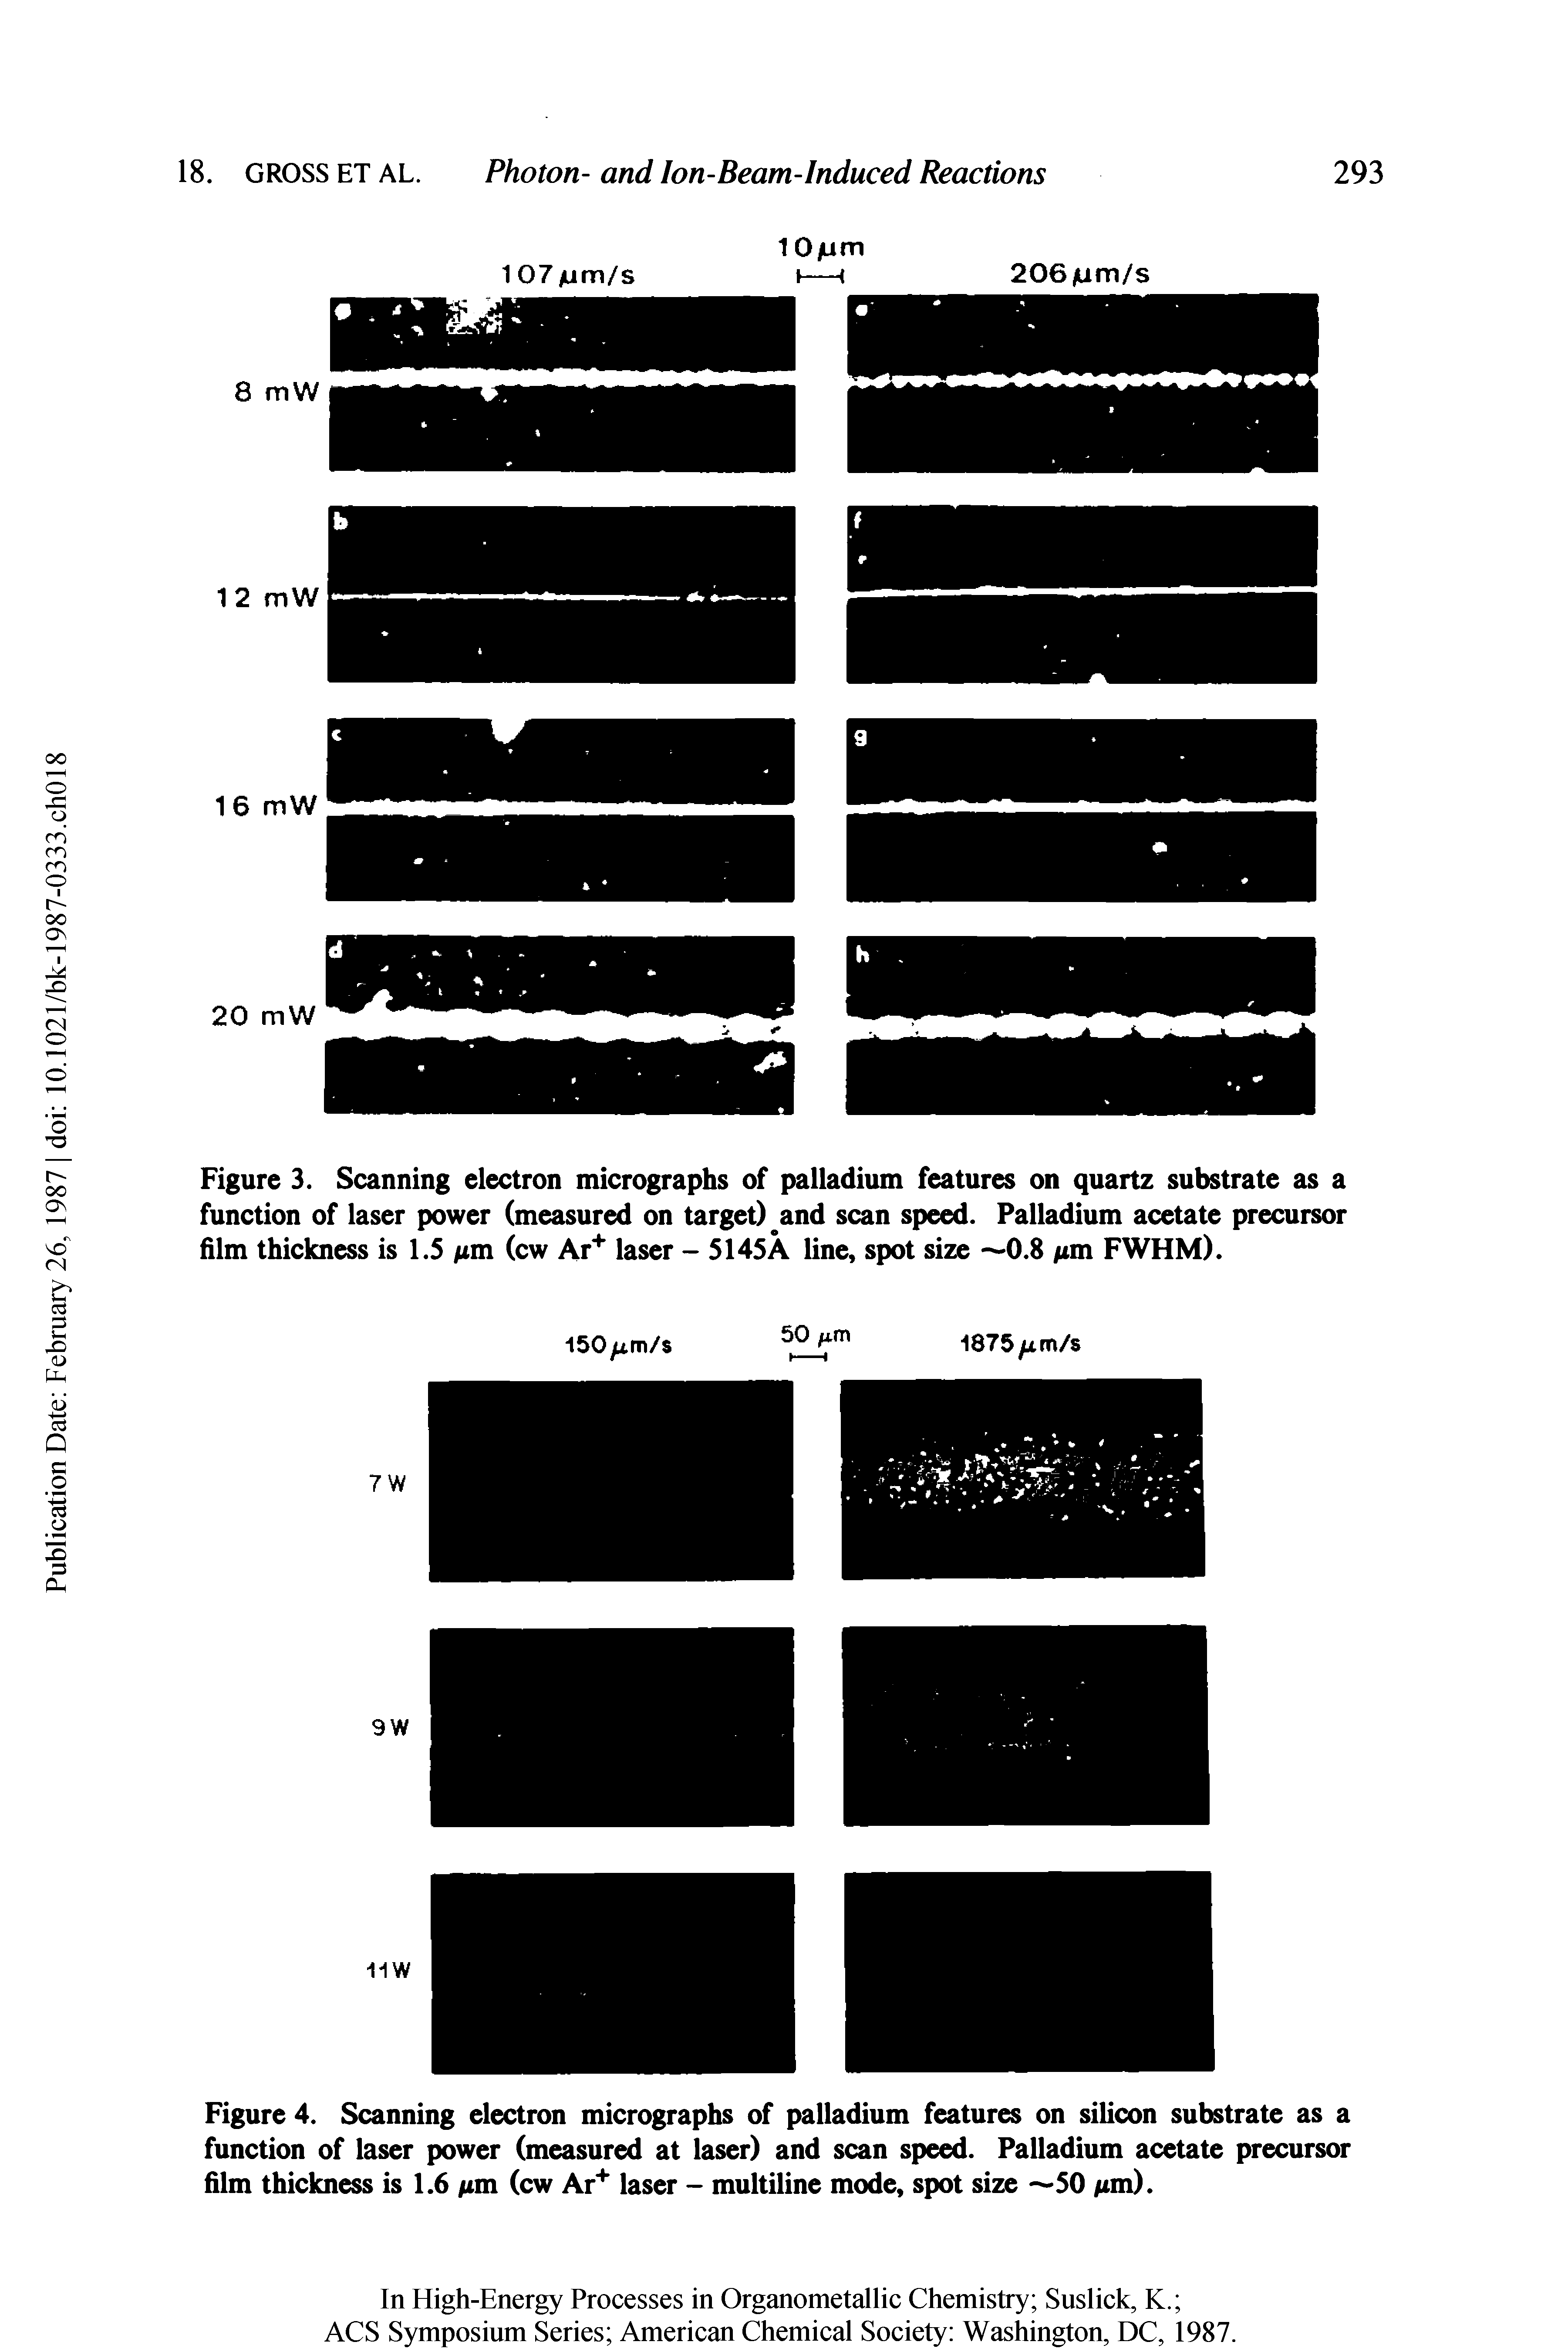 Figure 3. Scanning electron micrographs of palladium features on quartz substrate as a function of laser power (measured on target) and scan speed. Palladium acetate precursor film thickness is 1.5 pm (cw Ar+ laser - 5145A line, spot size —0.8 pm FWHM).